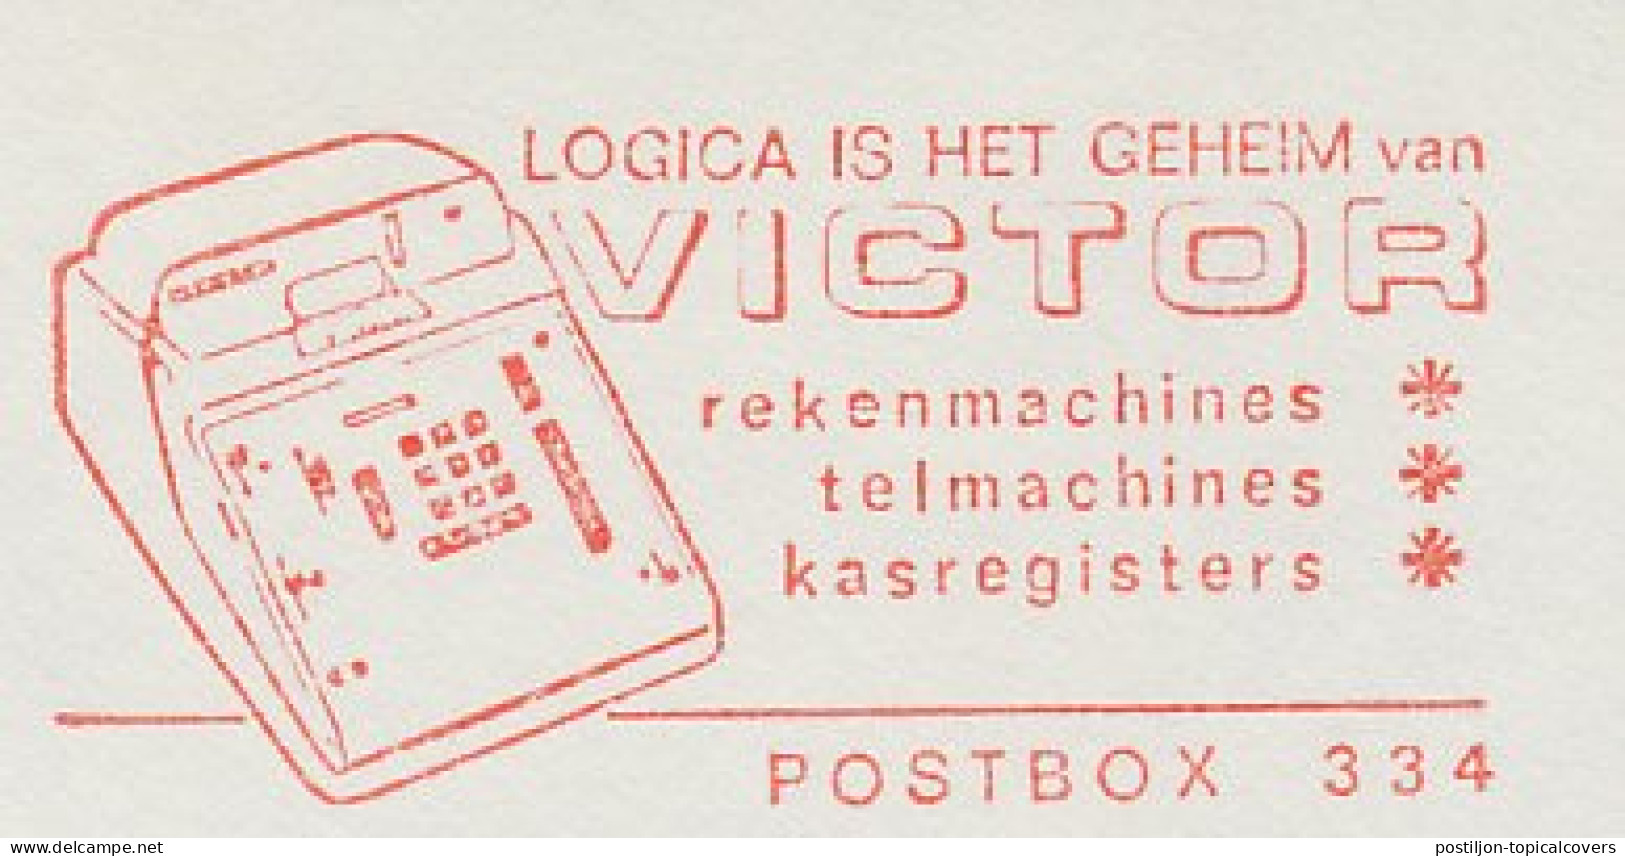 Meter Cut Netherlands 1965 Calculator - Counting Machine - Cash Register - Unclassified